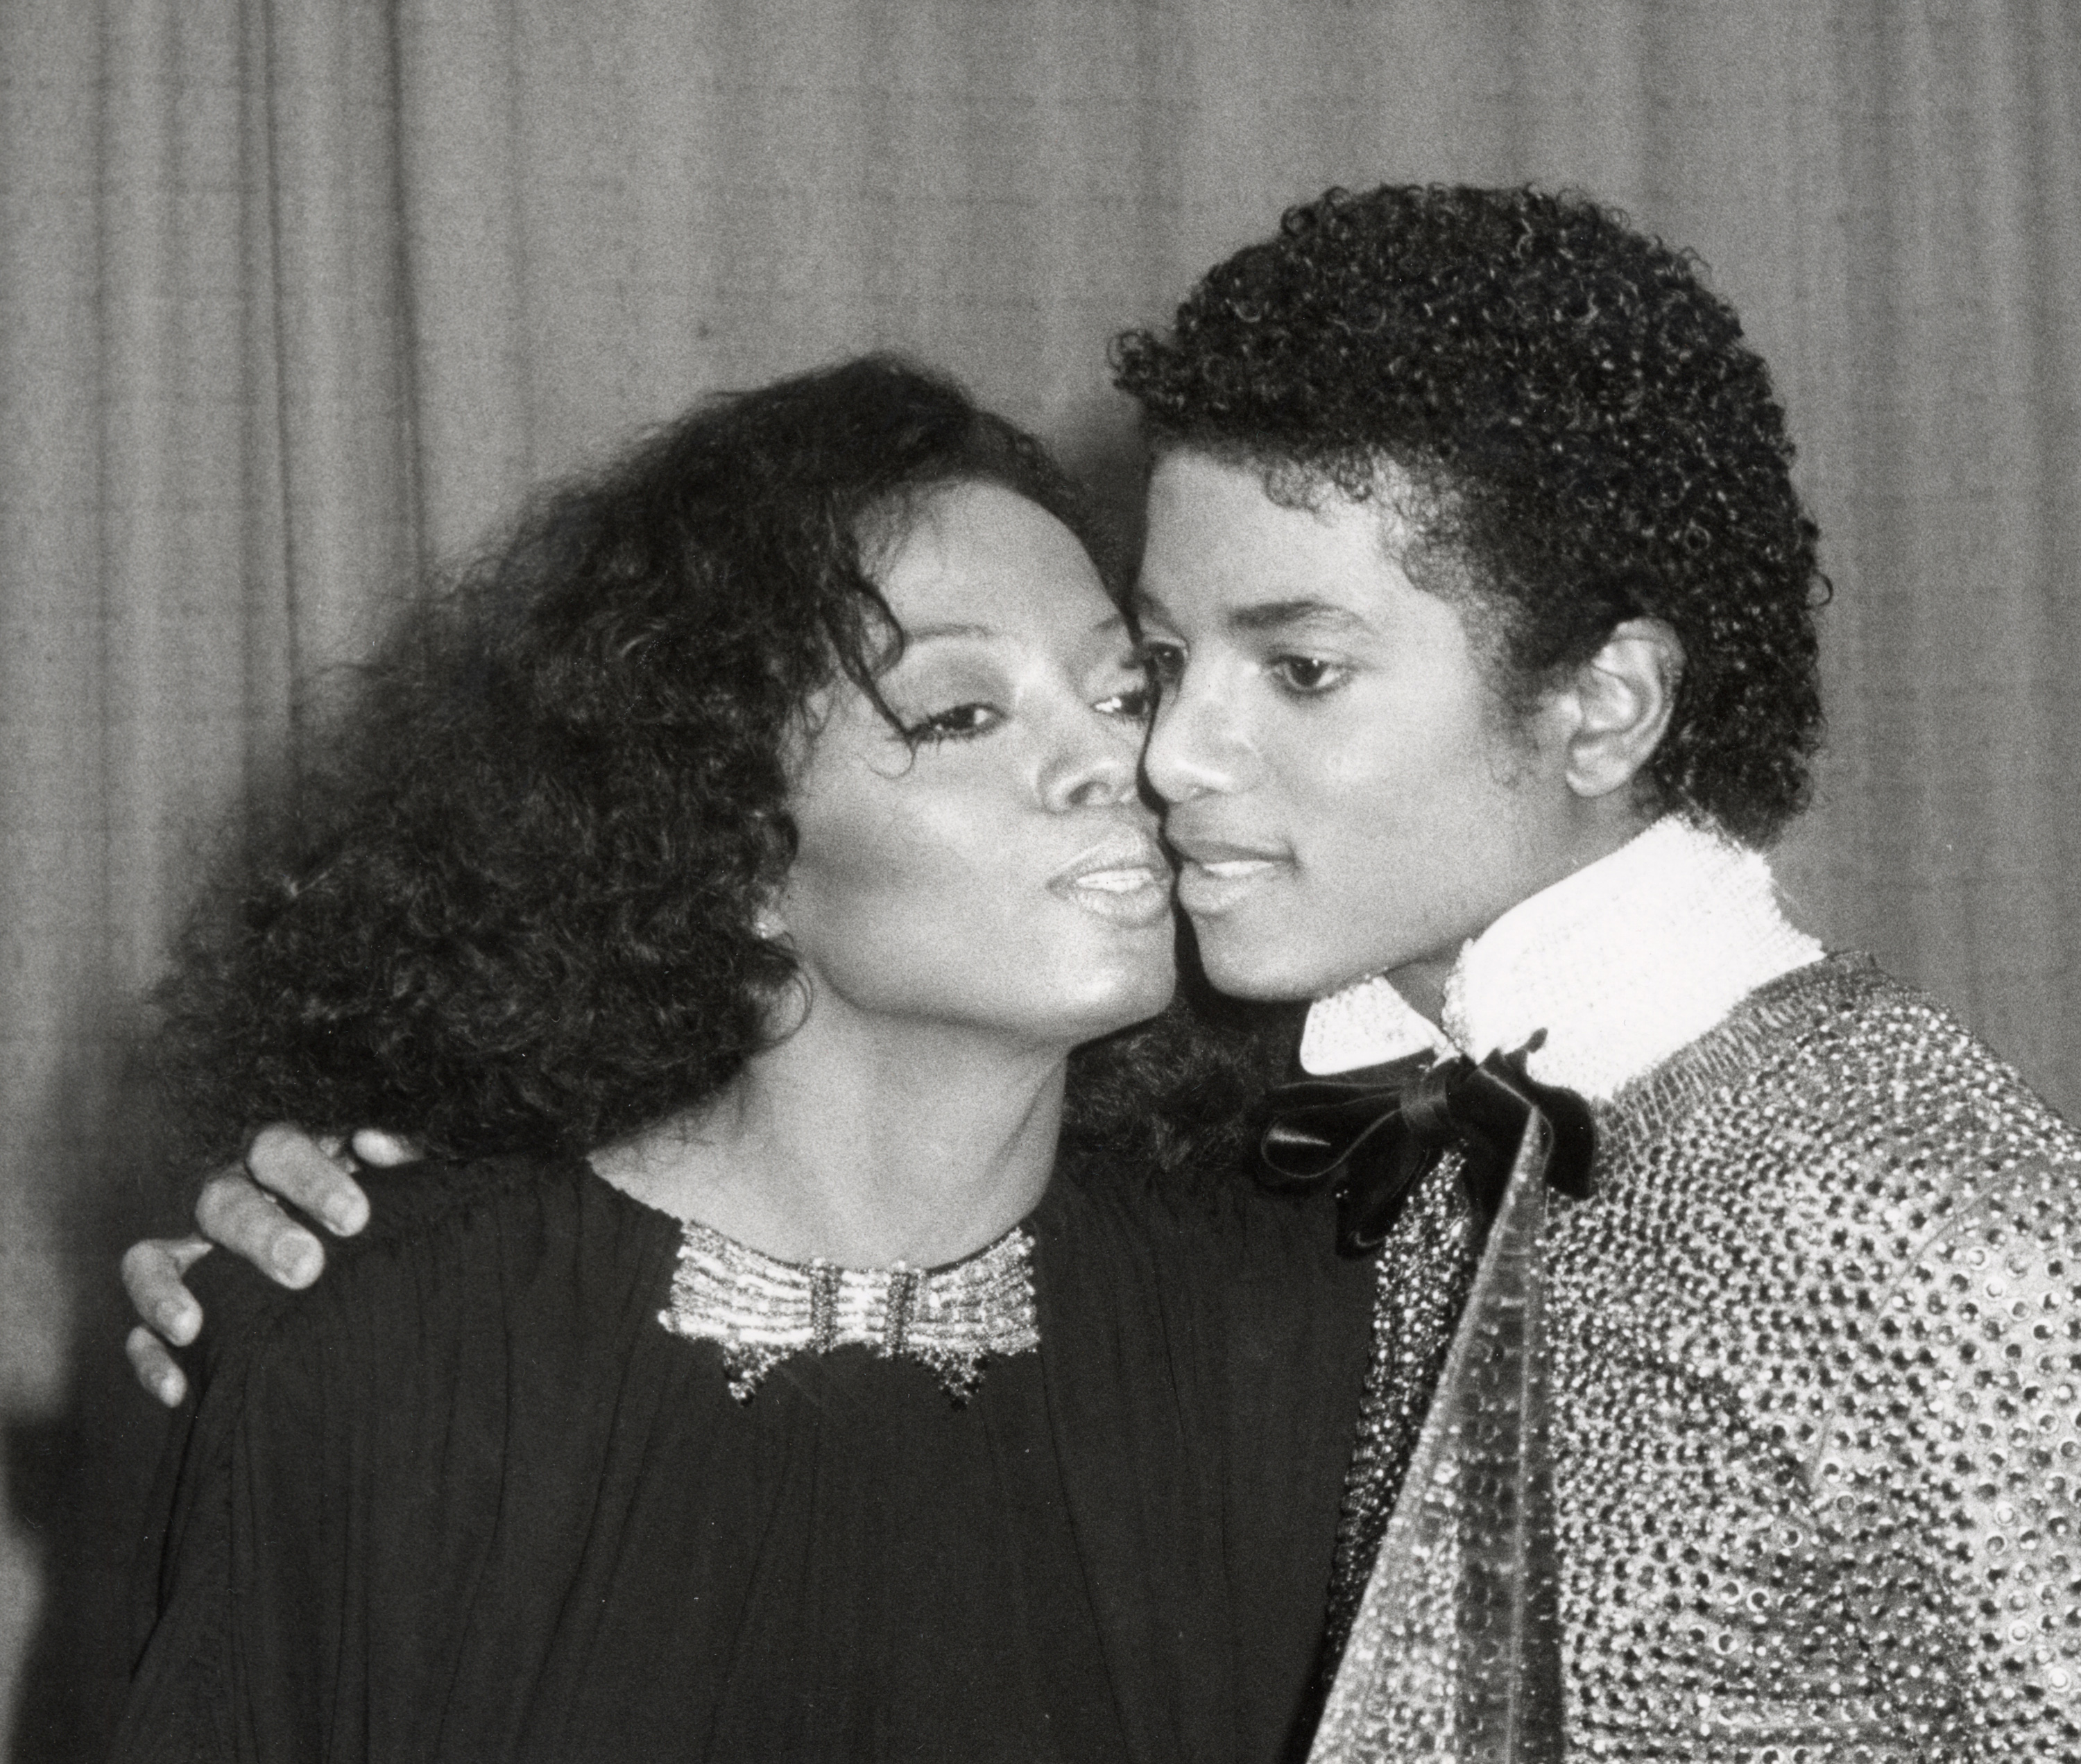 Diana Ross putting her face very close to Michael Jackson's